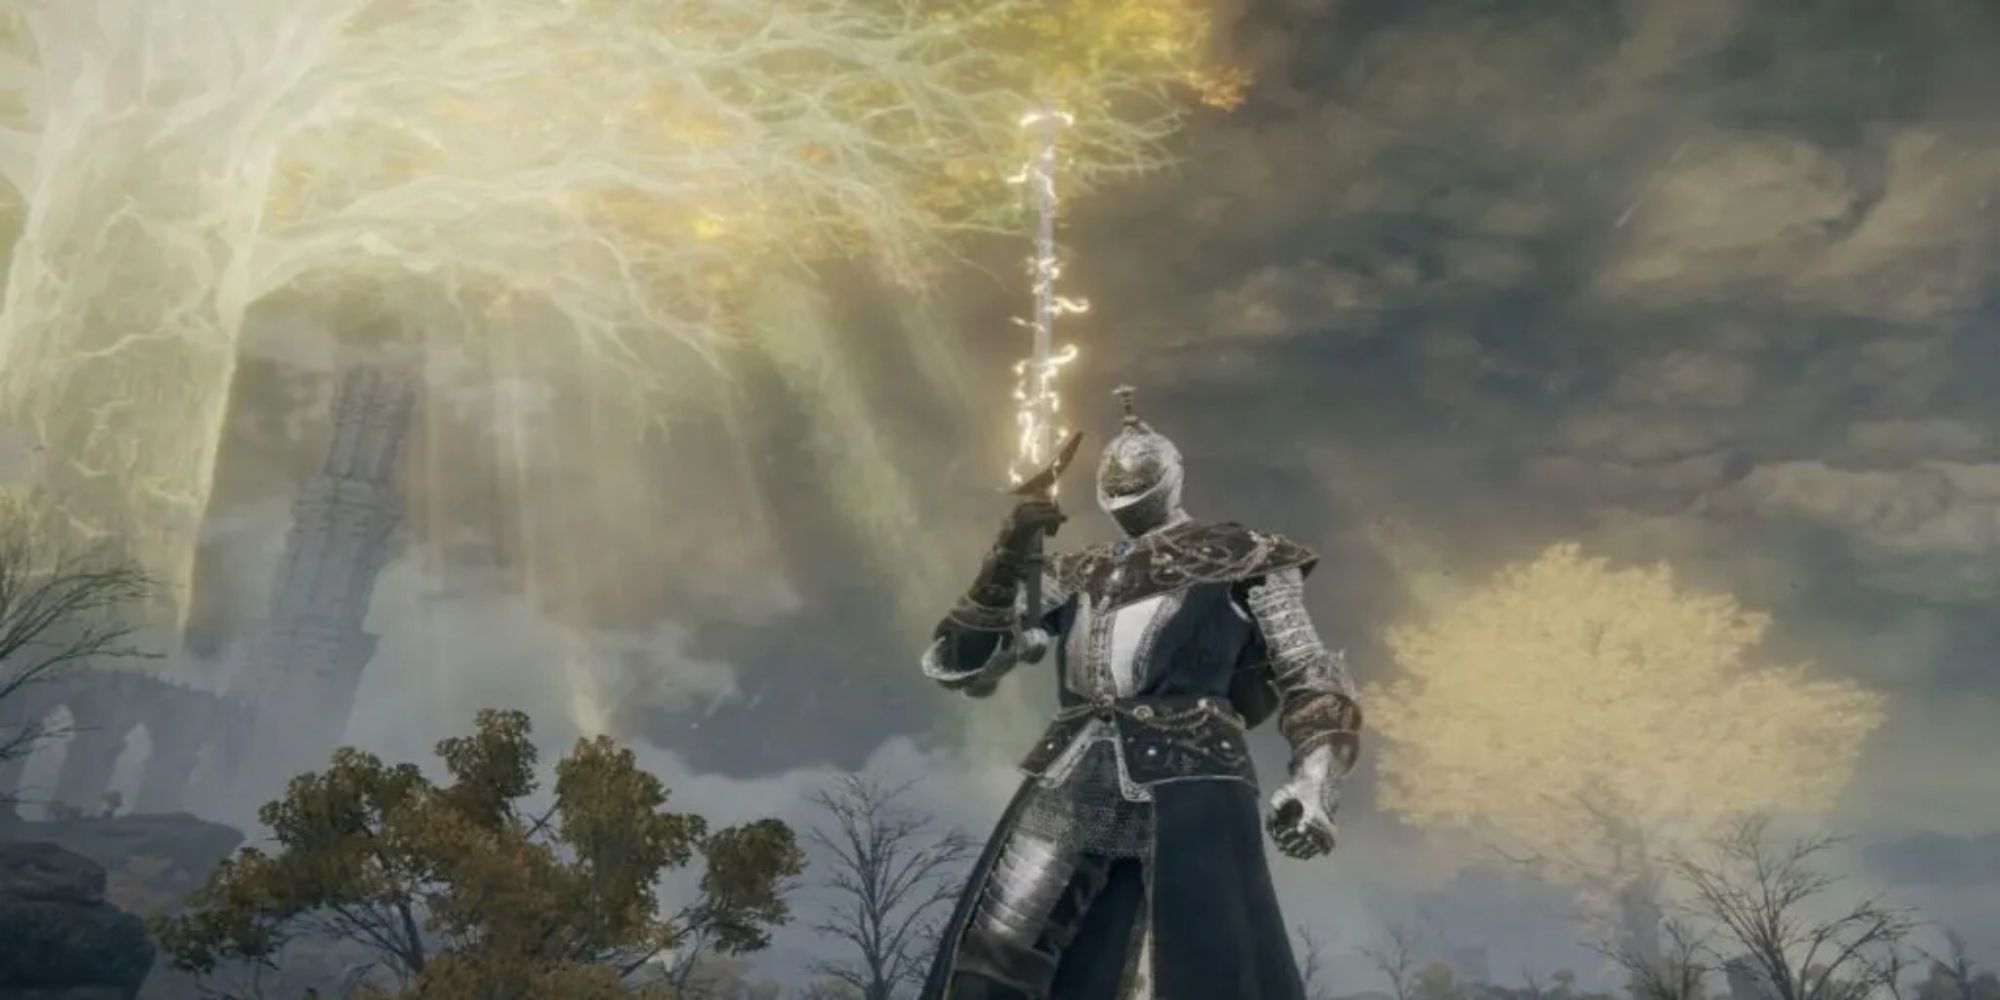 A Tarnished Knight holding a Holy Infused Sword in Elden Ring.